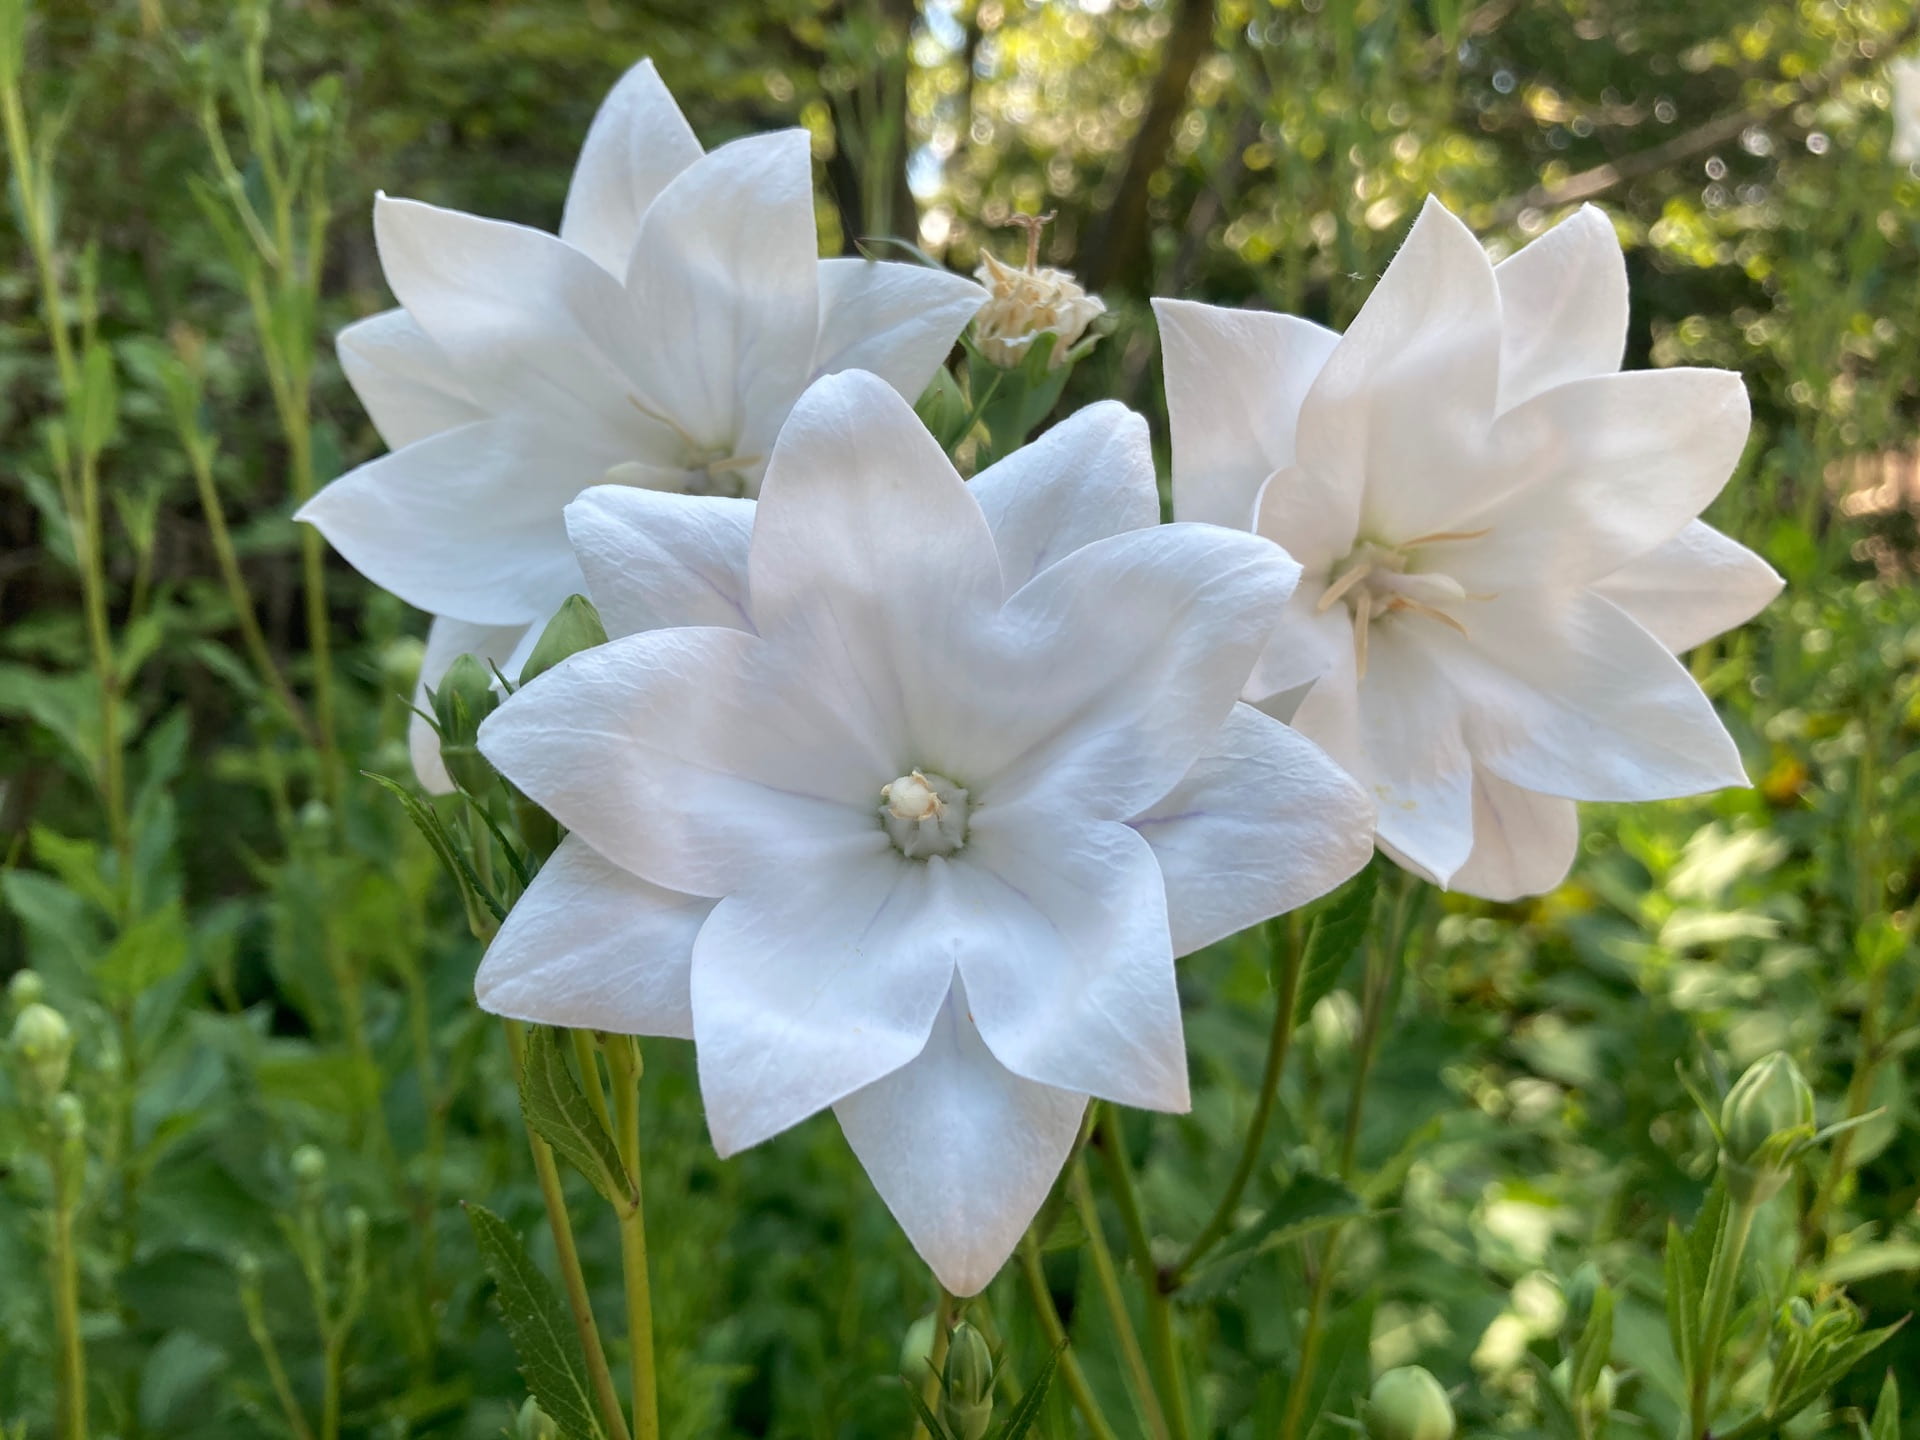 Balloon flower, Platycodon grandiflorus 'Astra Double White', blooms outside of Leidy Labs.